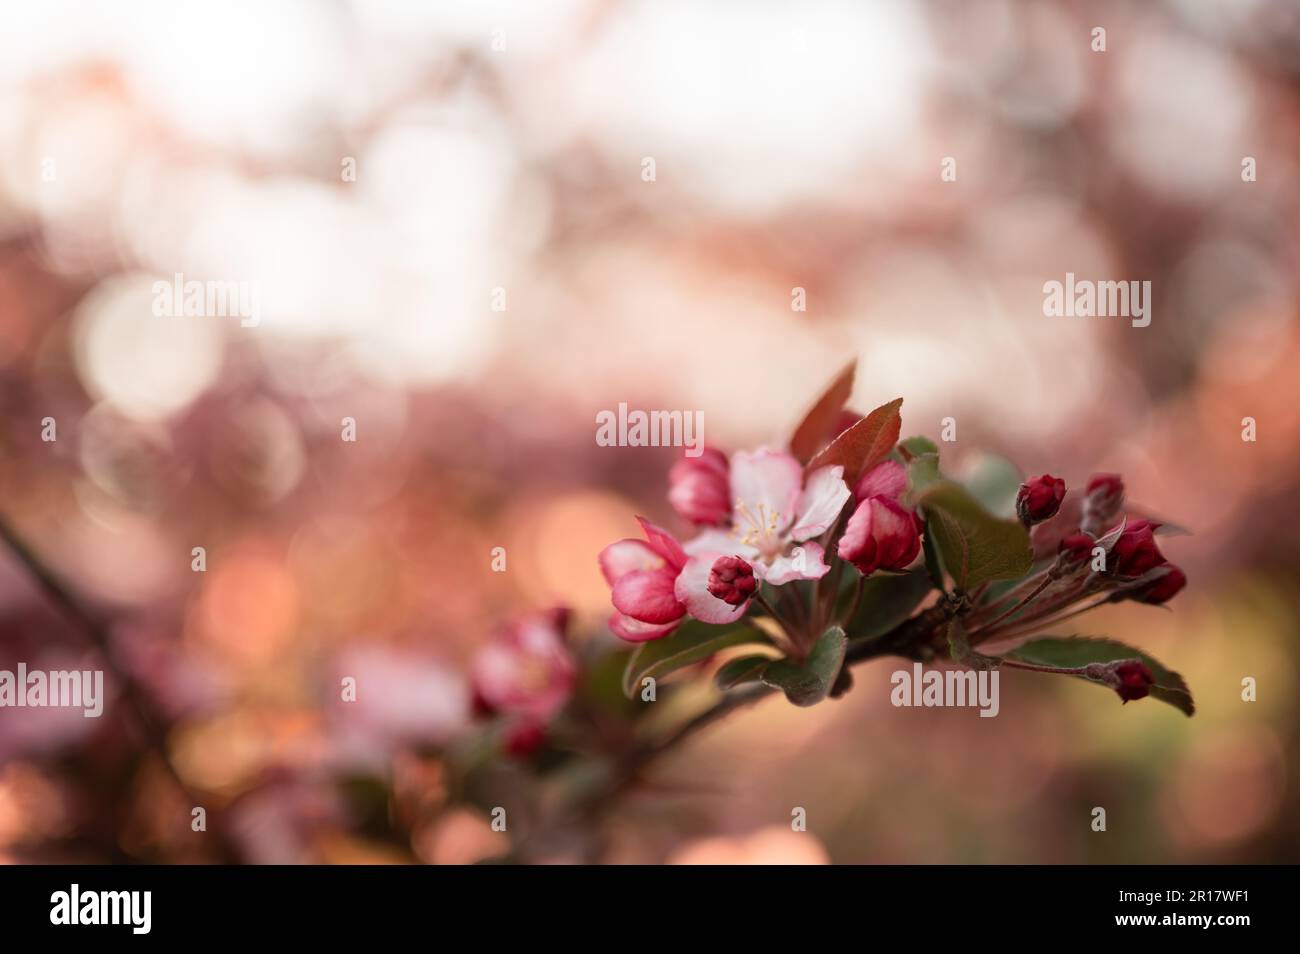 Spring Flowering Pink Crab Apple Tree Blossoms & Buds Isolated Stock Photo